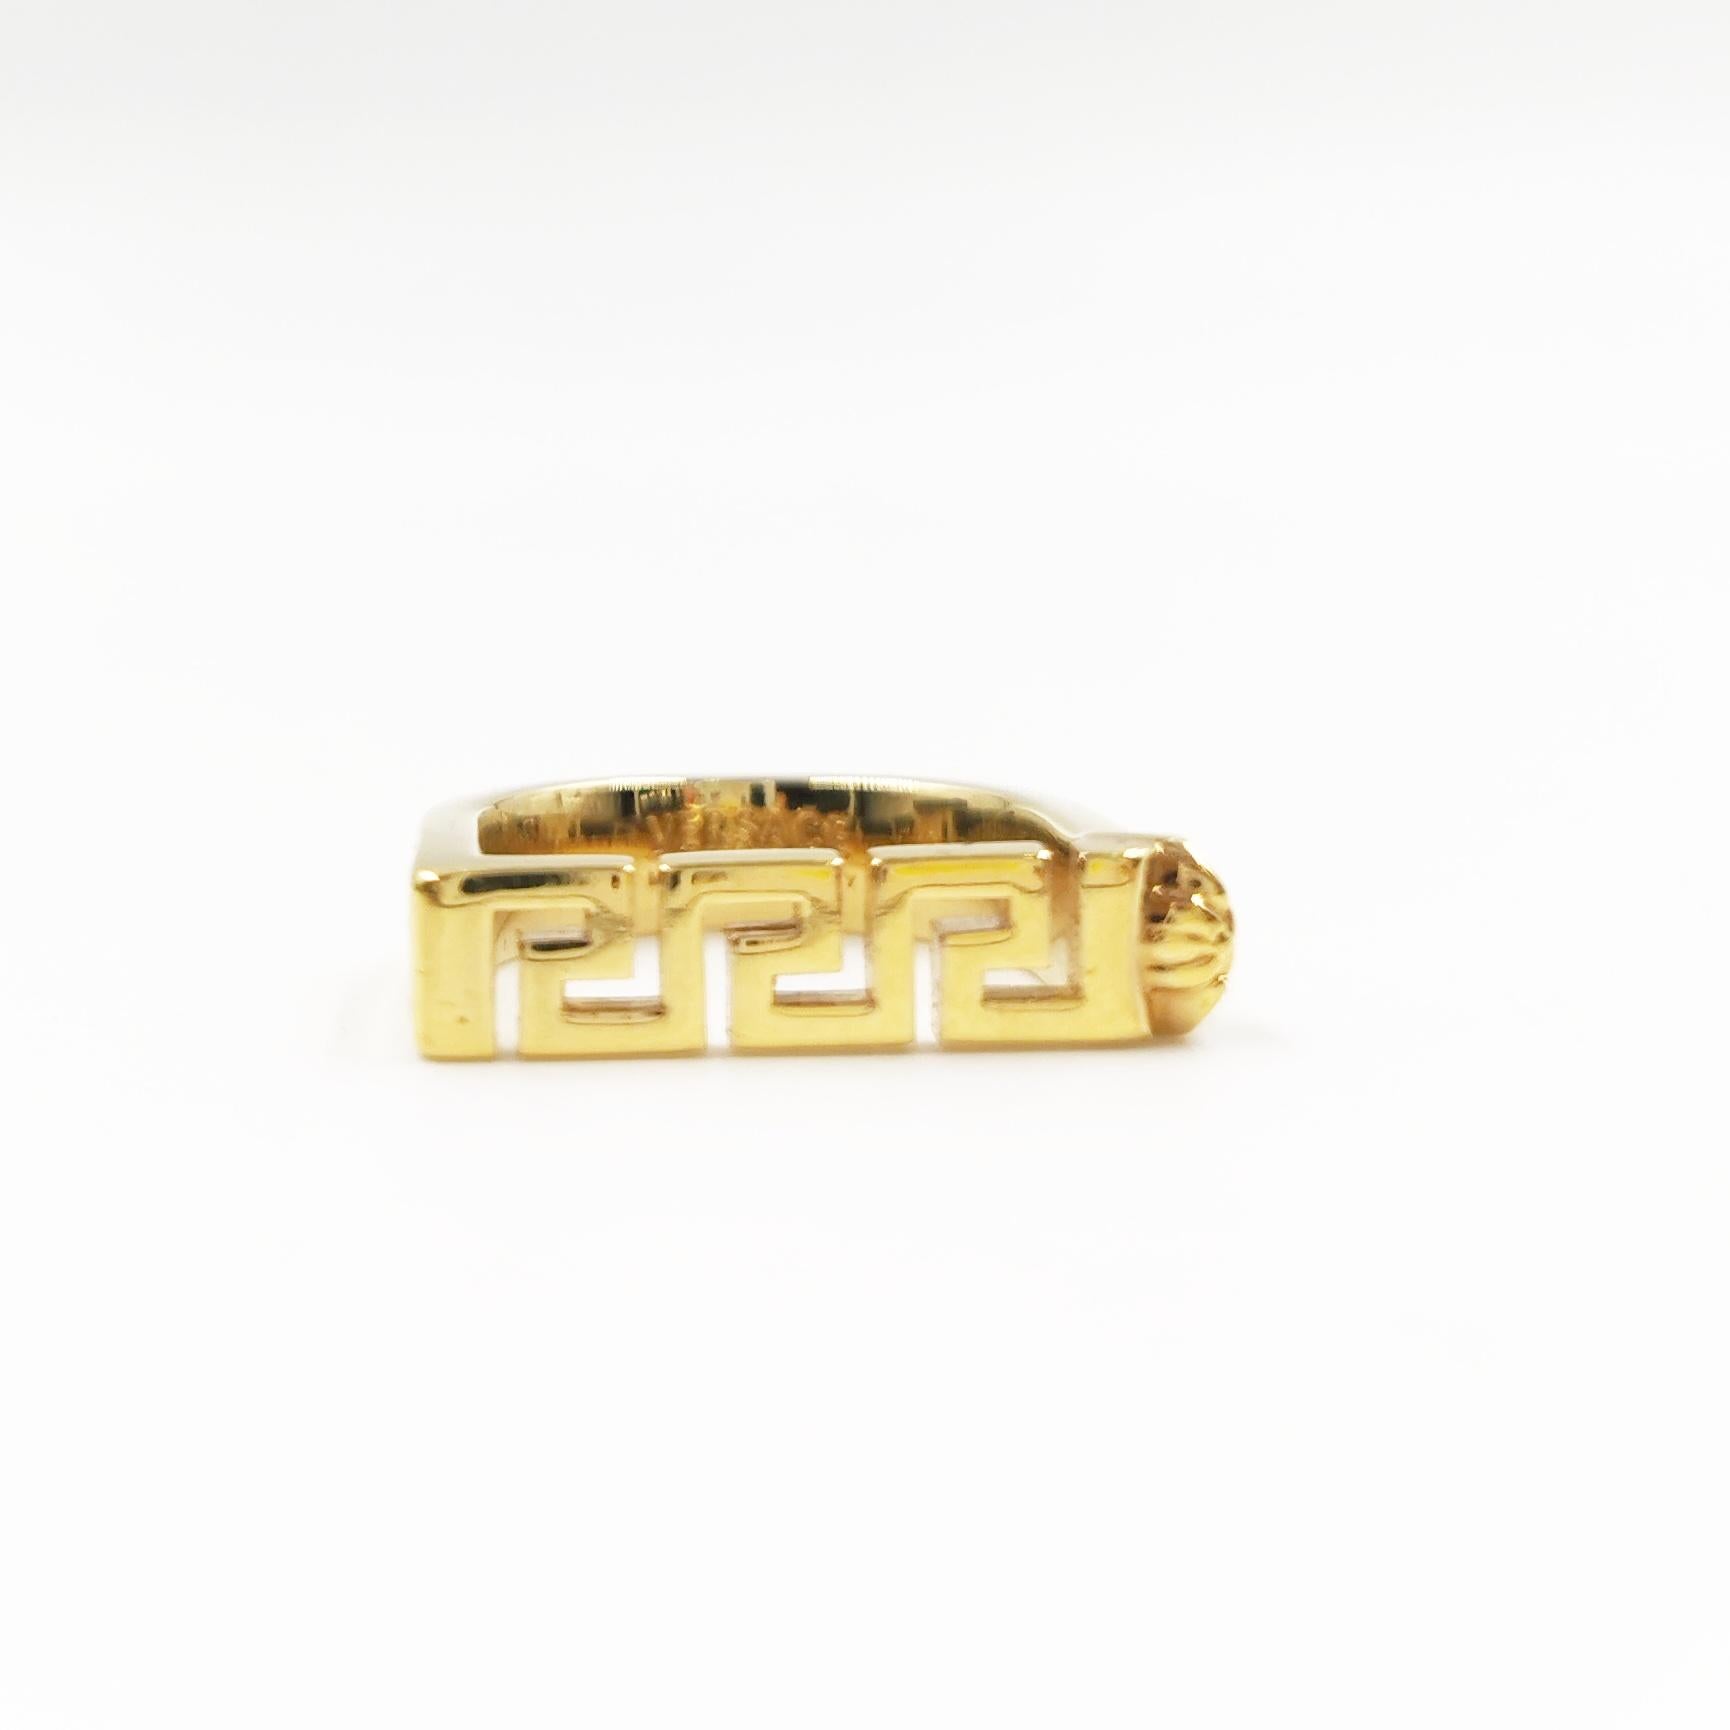 Elevate your style with the Versace Gold Greca Bar Women's Ring, a dazzling piece that combines modern elegance with iconic Versace design. This exquisite ring, brand new in its original box, is a true statement of luxury and sophistication.

The